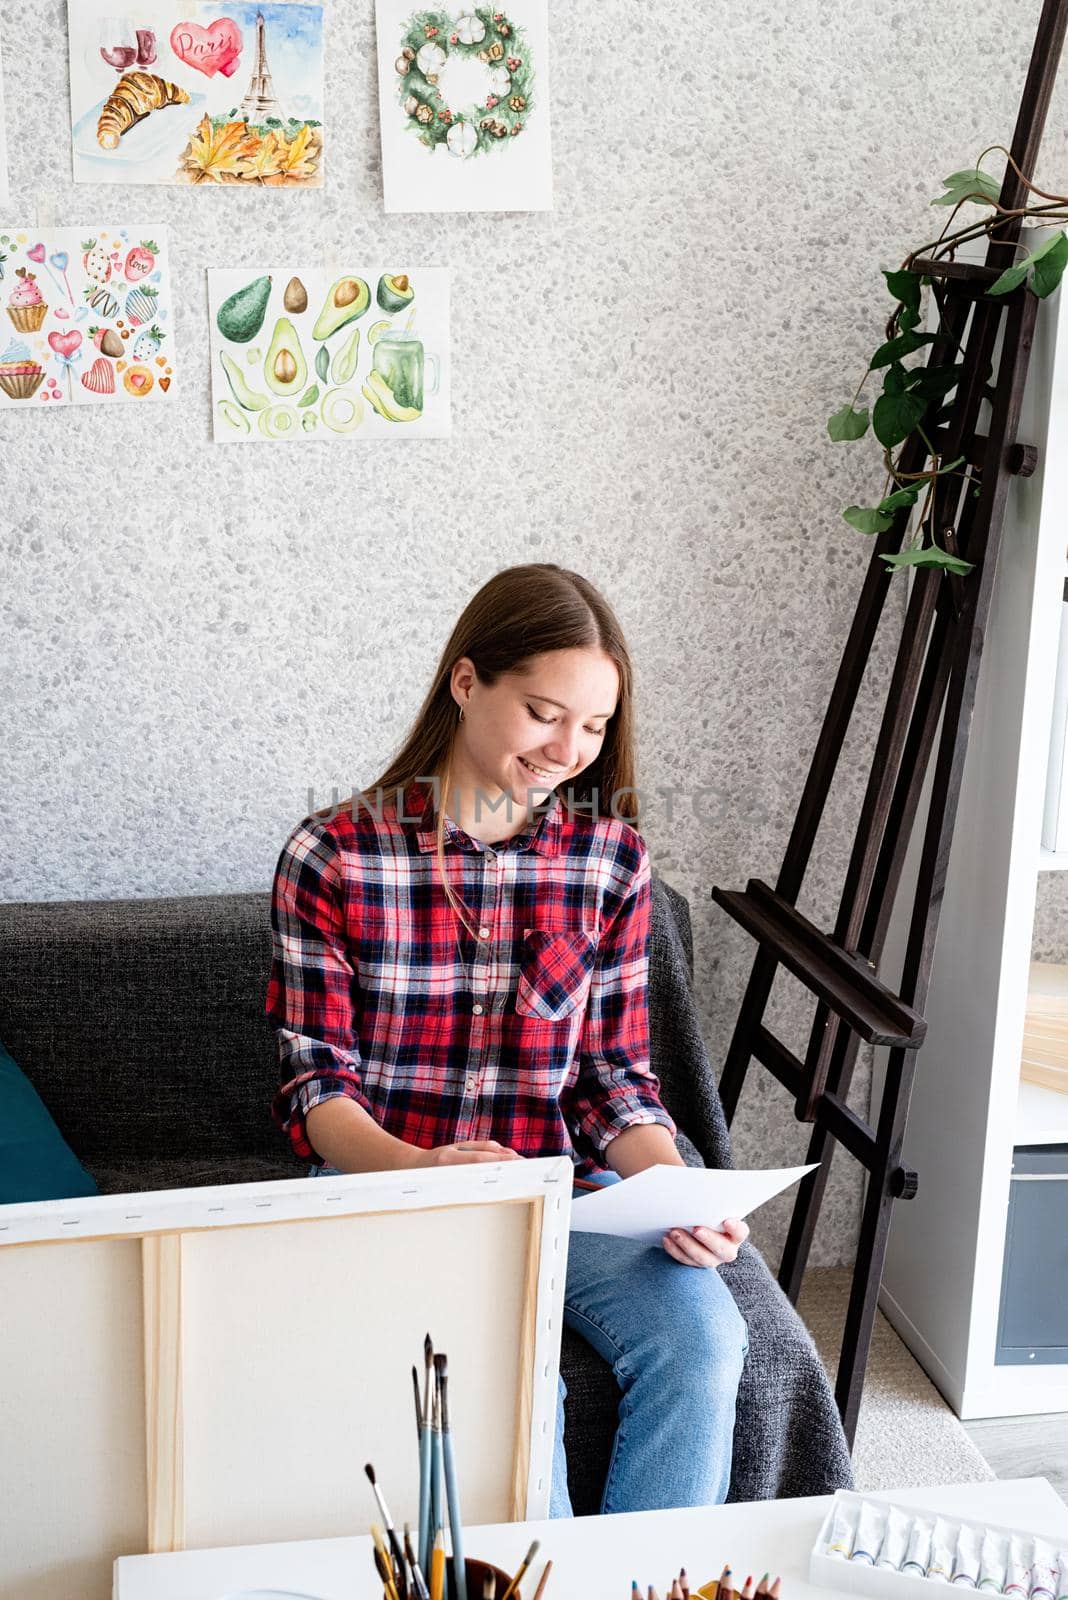 Young woman artist in check shirt painting a picture at home